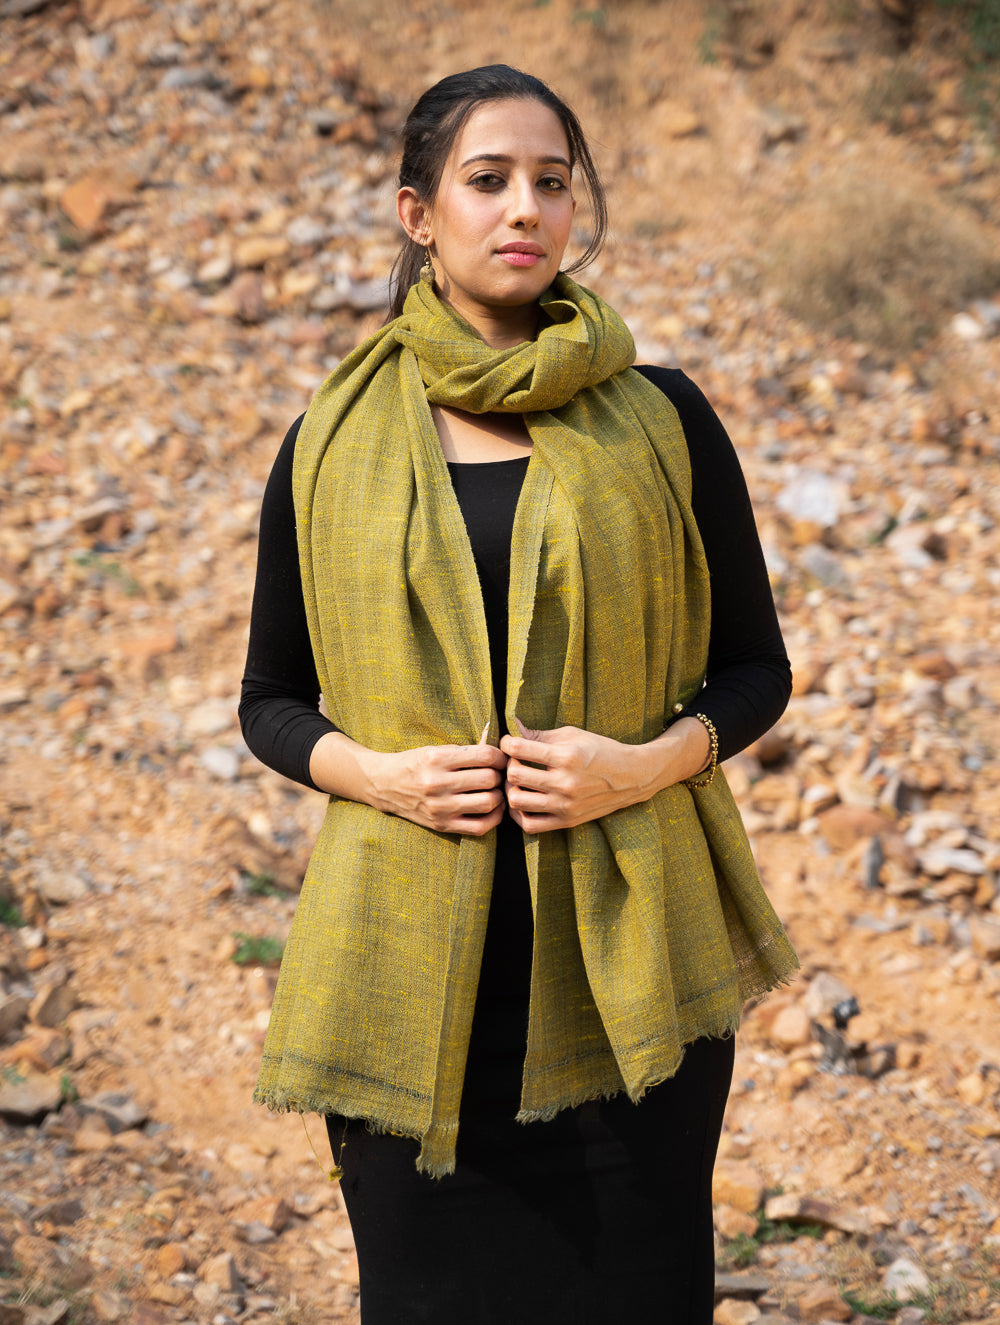 Load image into Gallery viewer, Fine, Soft Himachal Wool Plain Shawl - Pale Green